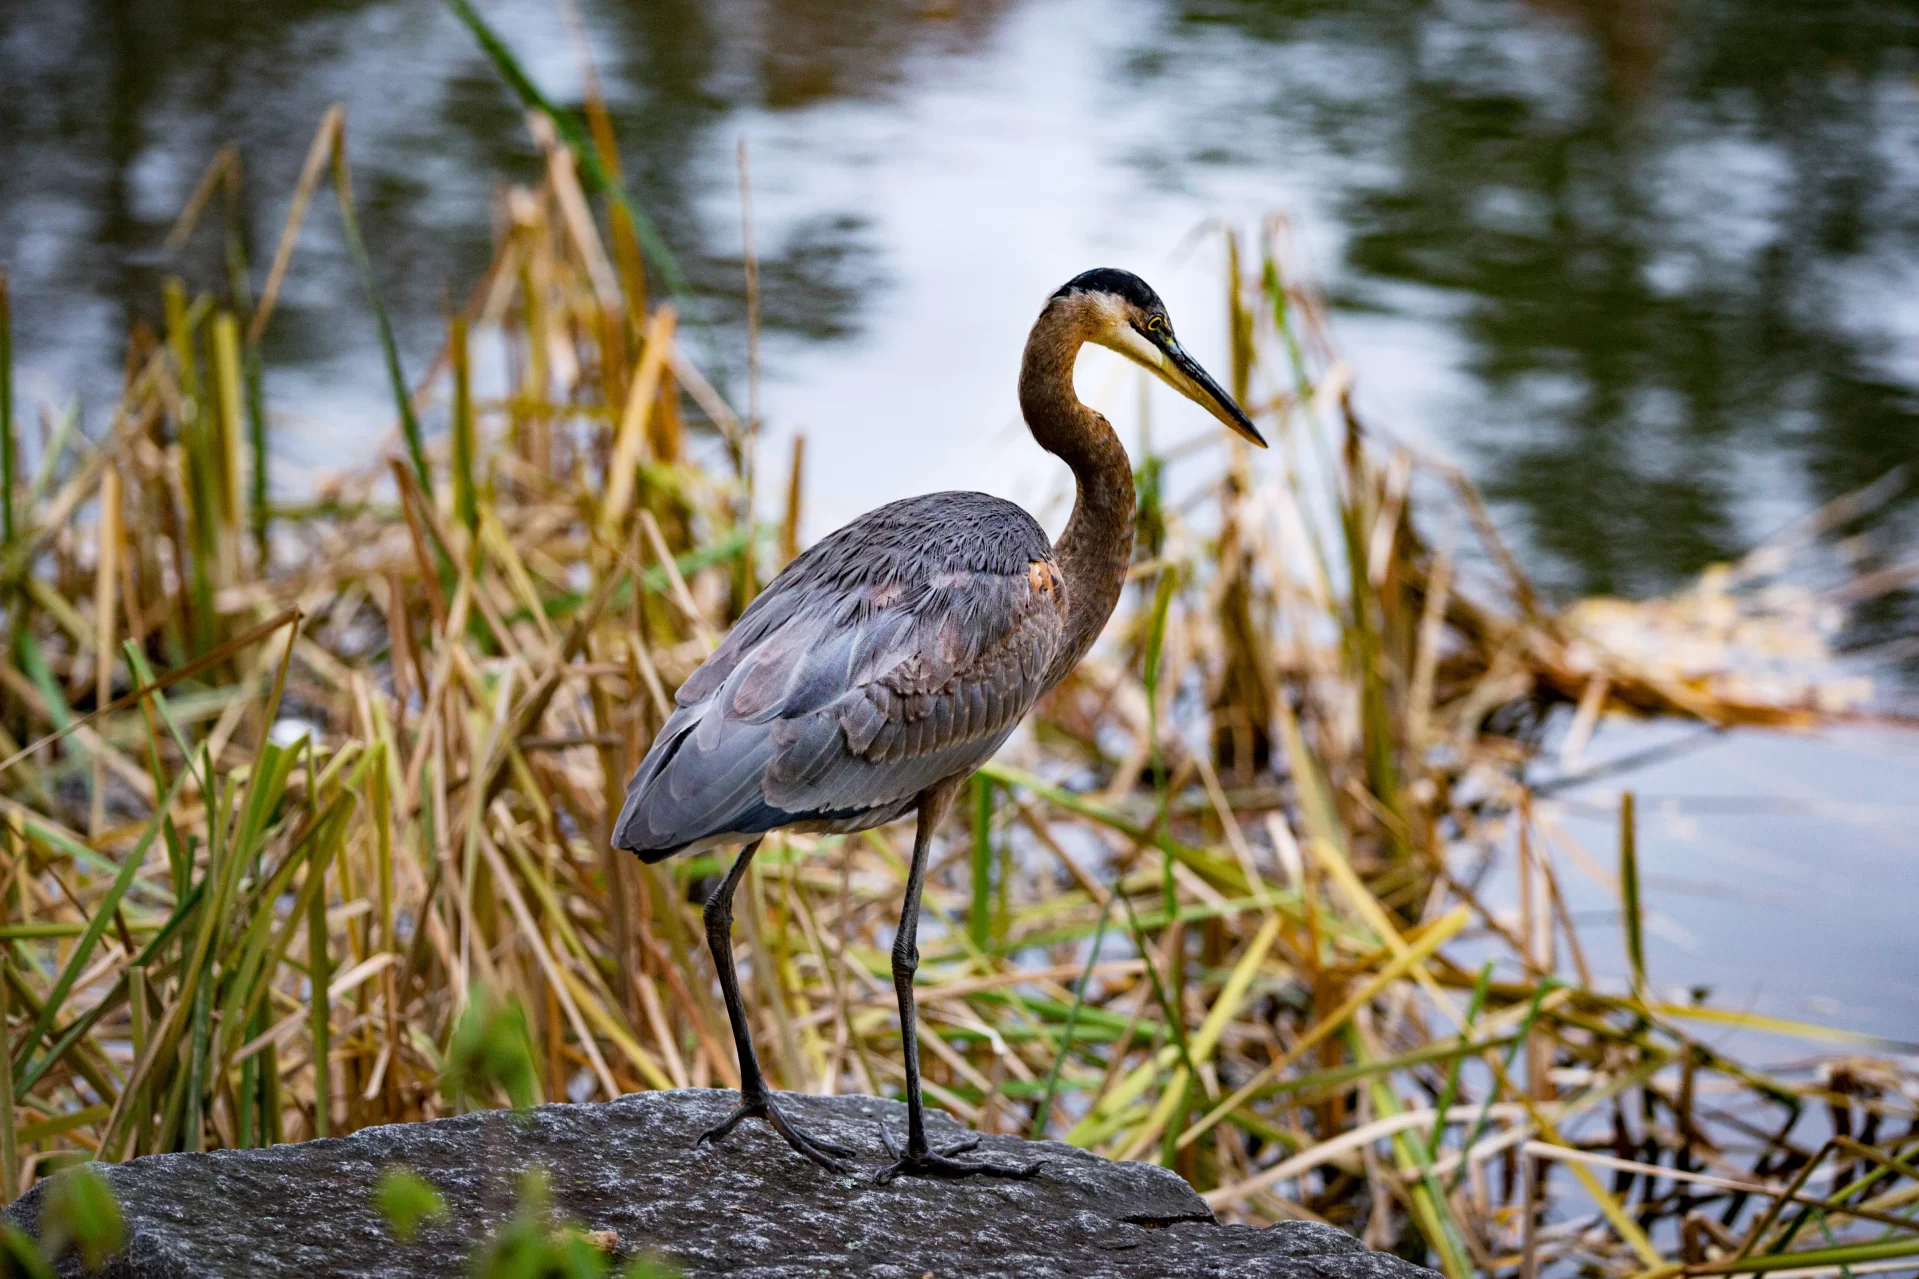 The Puddle's aka Lake Andrews resident great blue heron stakes out a spot amidst a few afternoon raindrops.